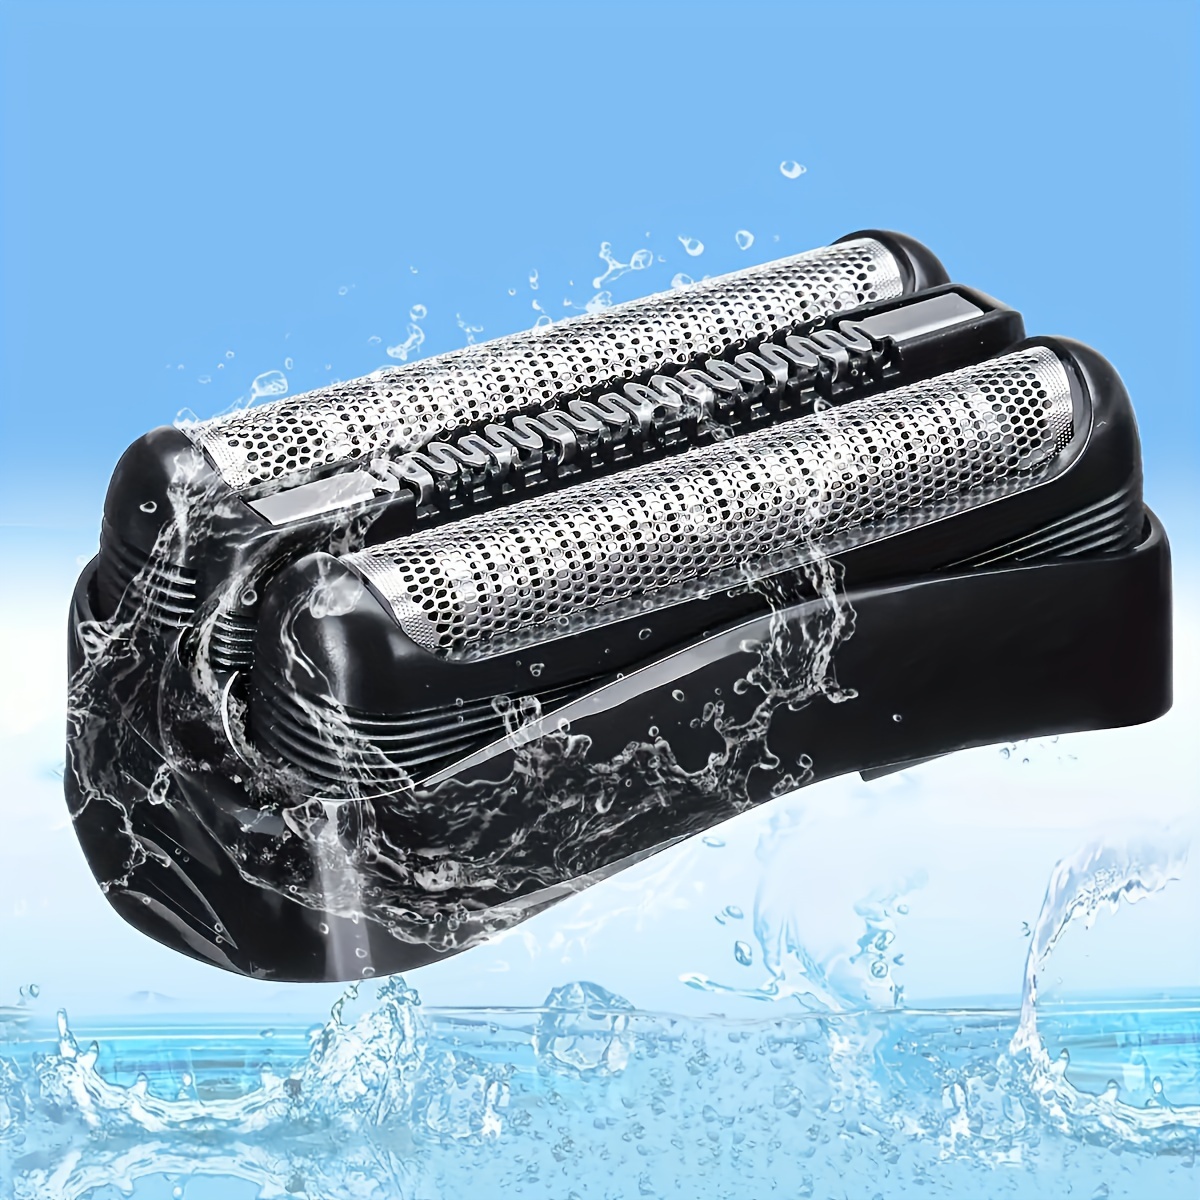 Electric Shaver Head Accessories For Braun Series 32B 32S 21B 3 Series  Knife Net Membrane 301S